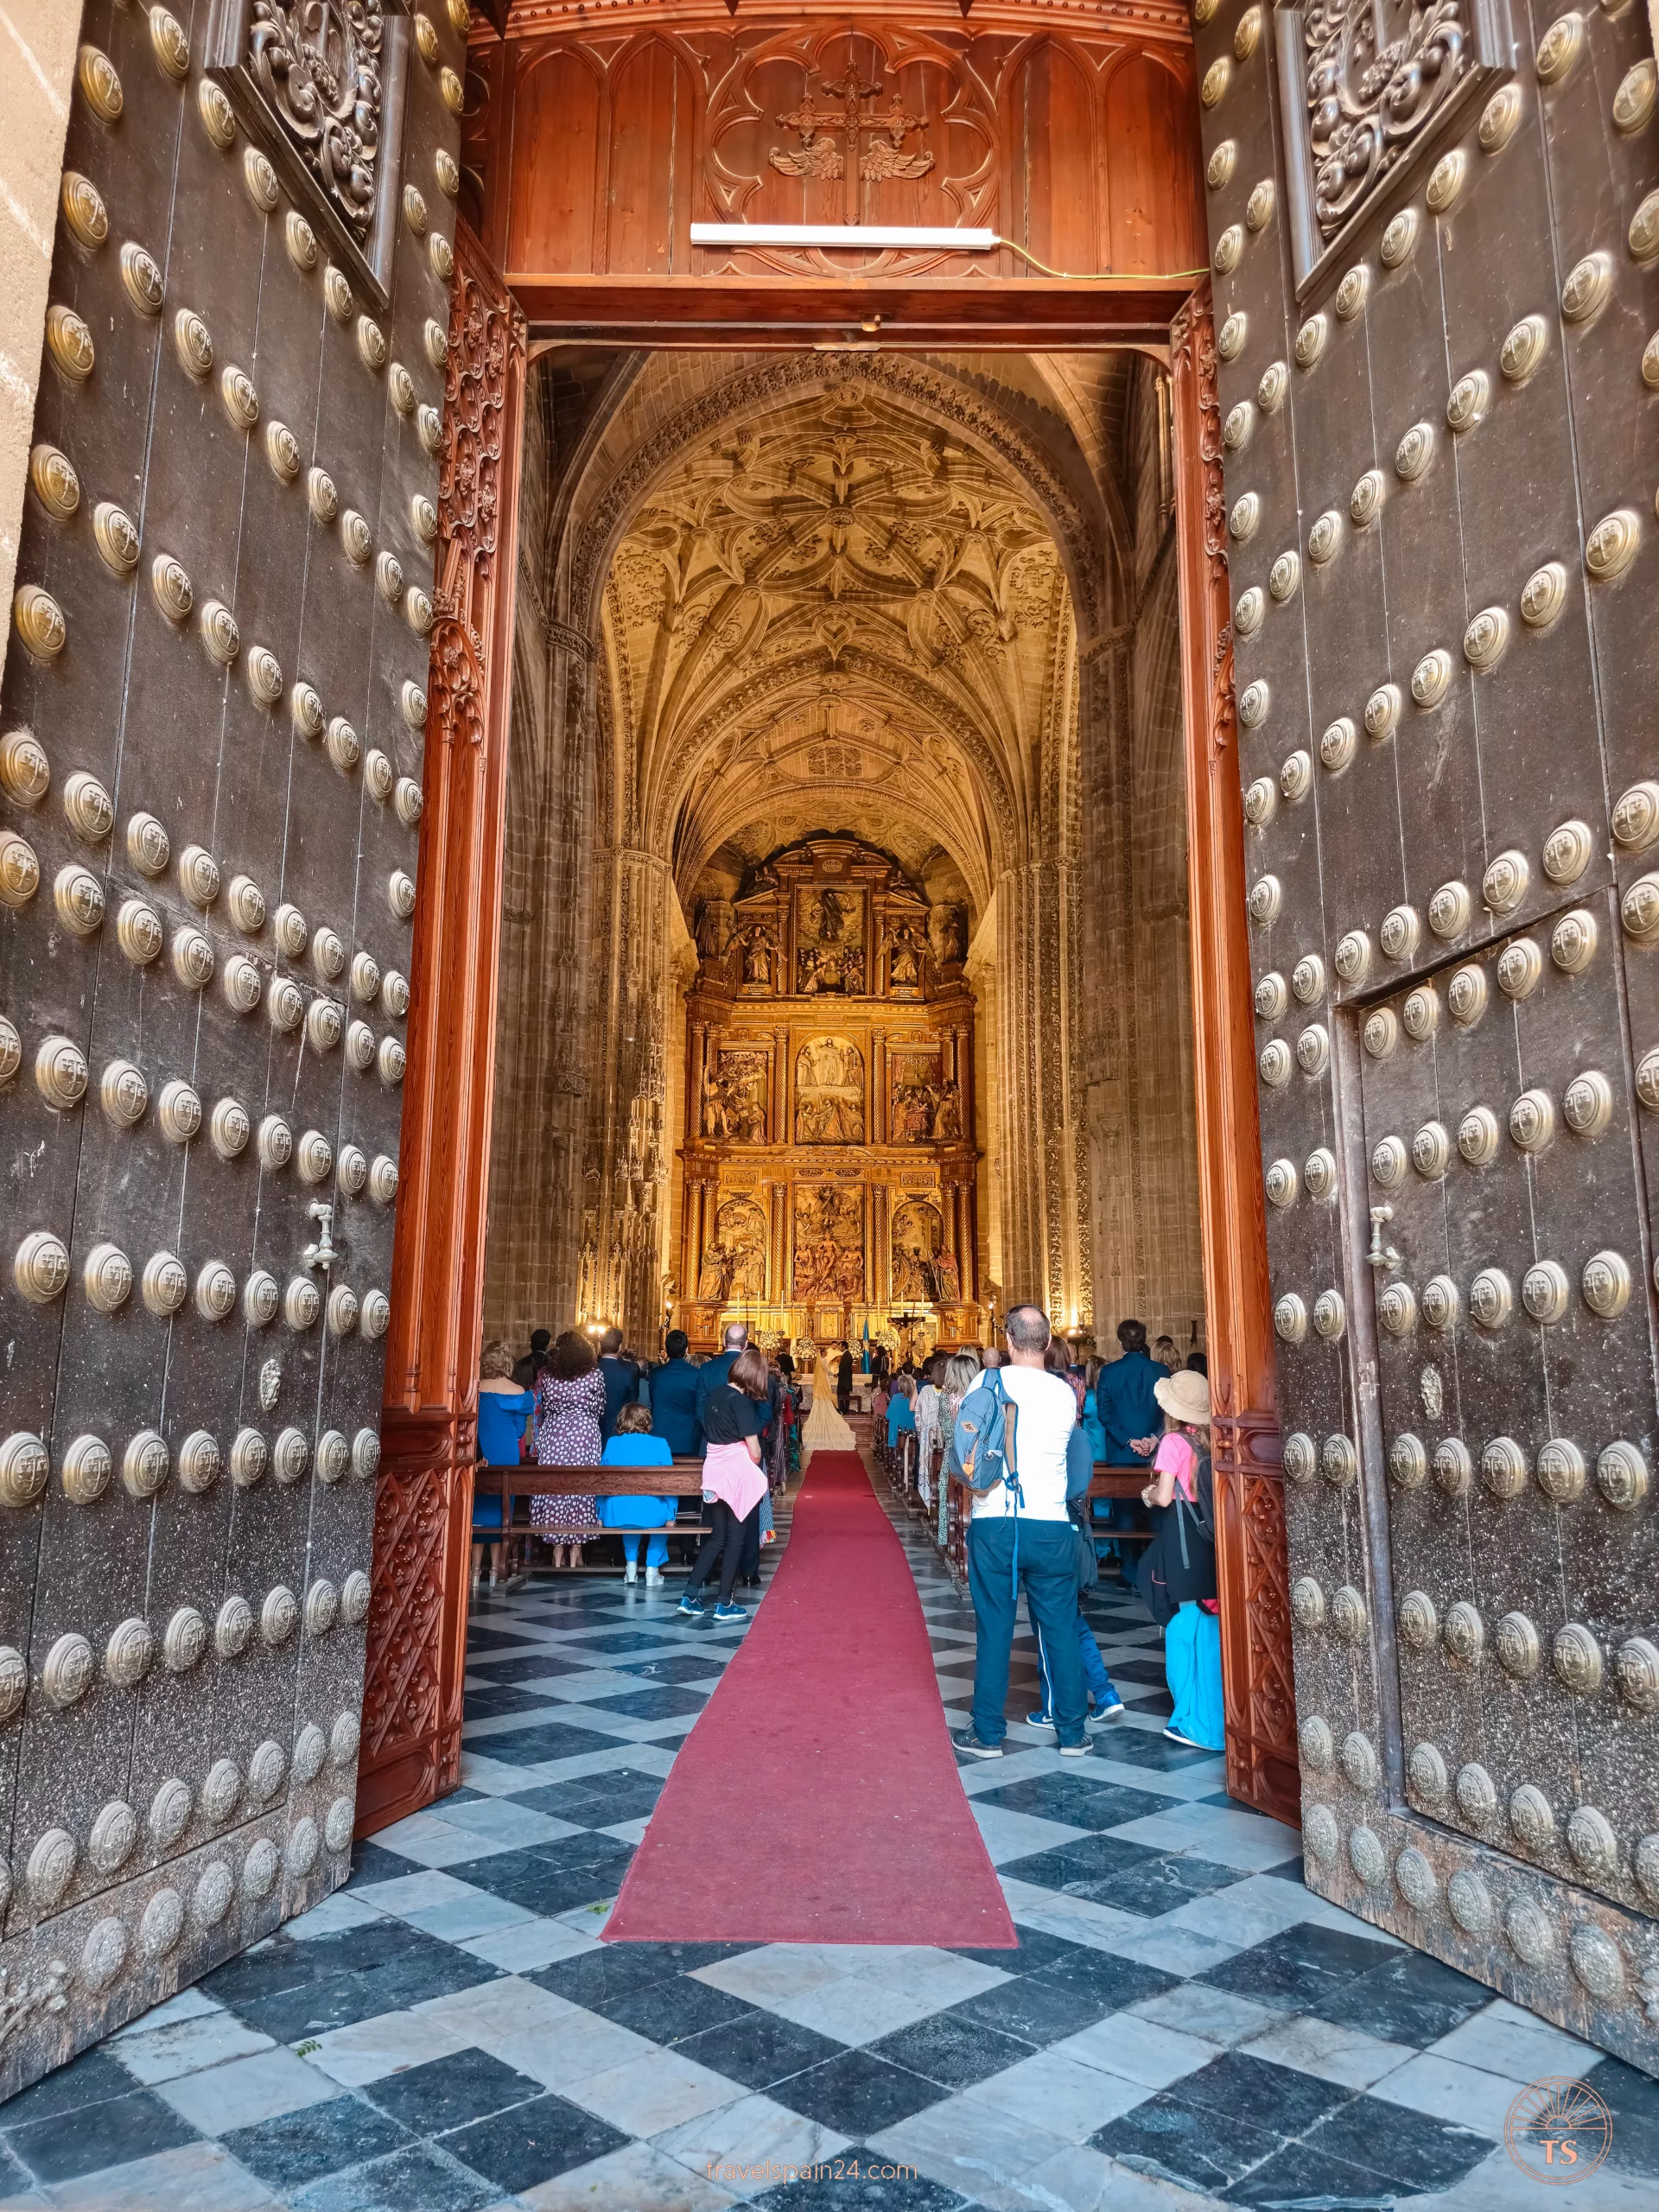 The inside of Iglesia de San Miguel in Jerez de la Frontera during a wedding ceremony. This highlights the cultural and historical significance of the church as a vibrant community center.